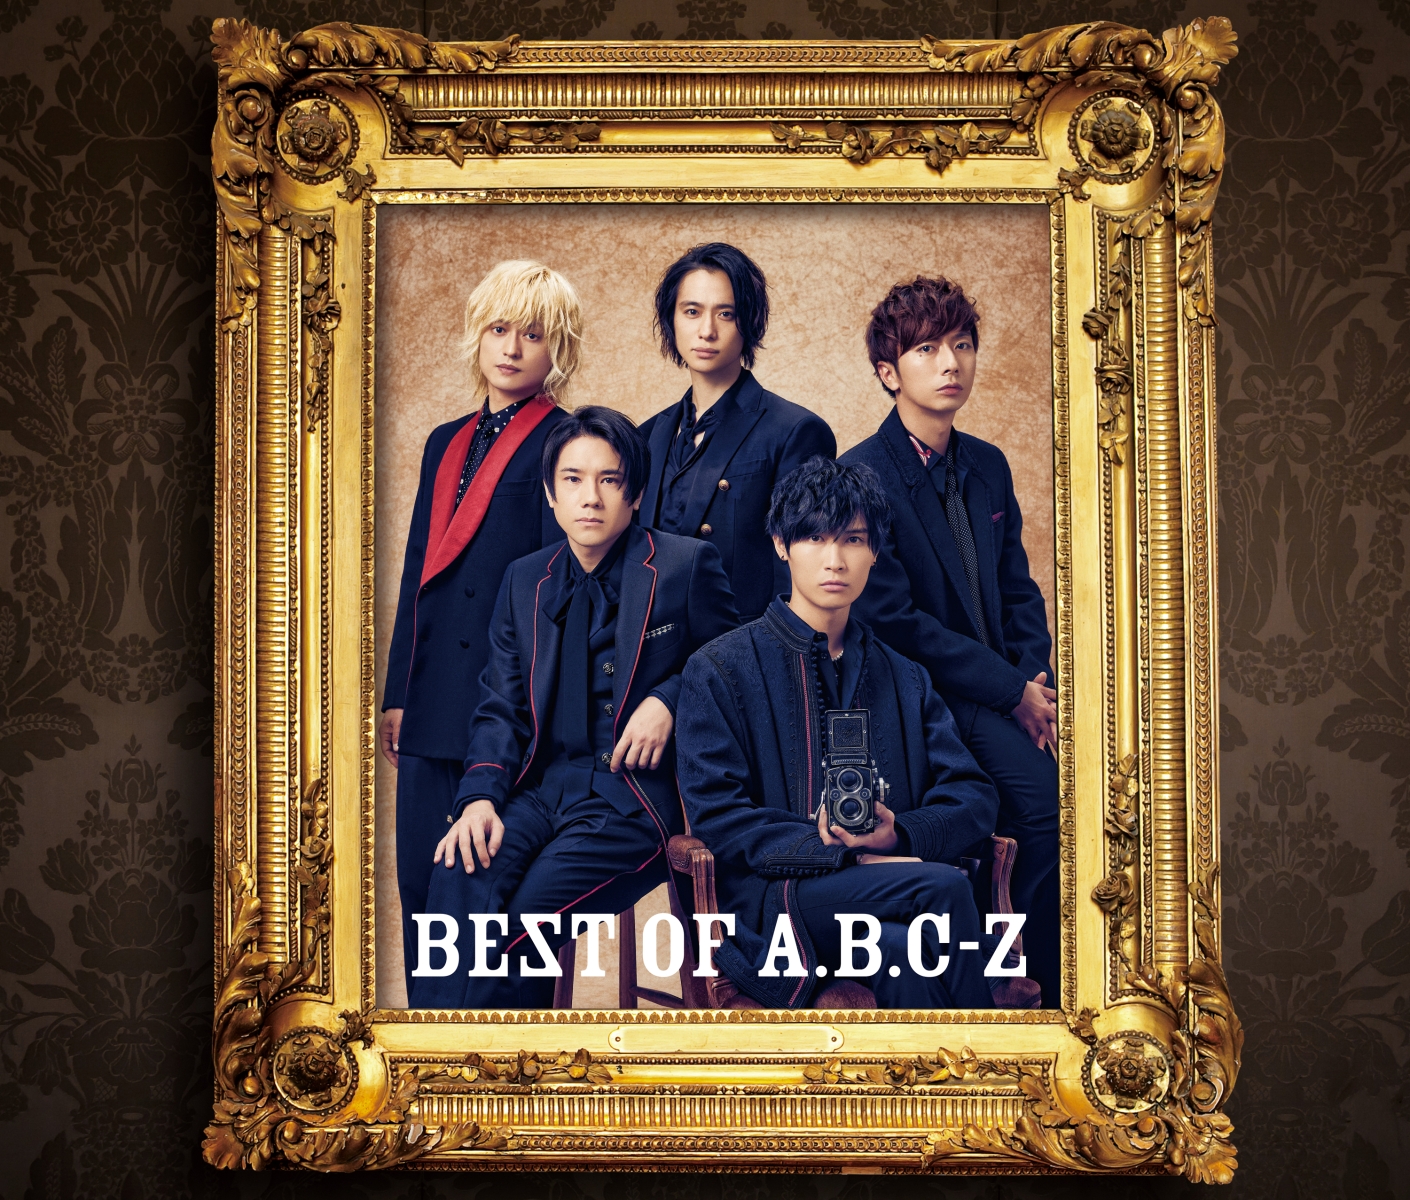 BEST OF A.B.C-Z -Variety Collection- (初回限定盤B 3CD＋Blu-ray) (特典なし)画像